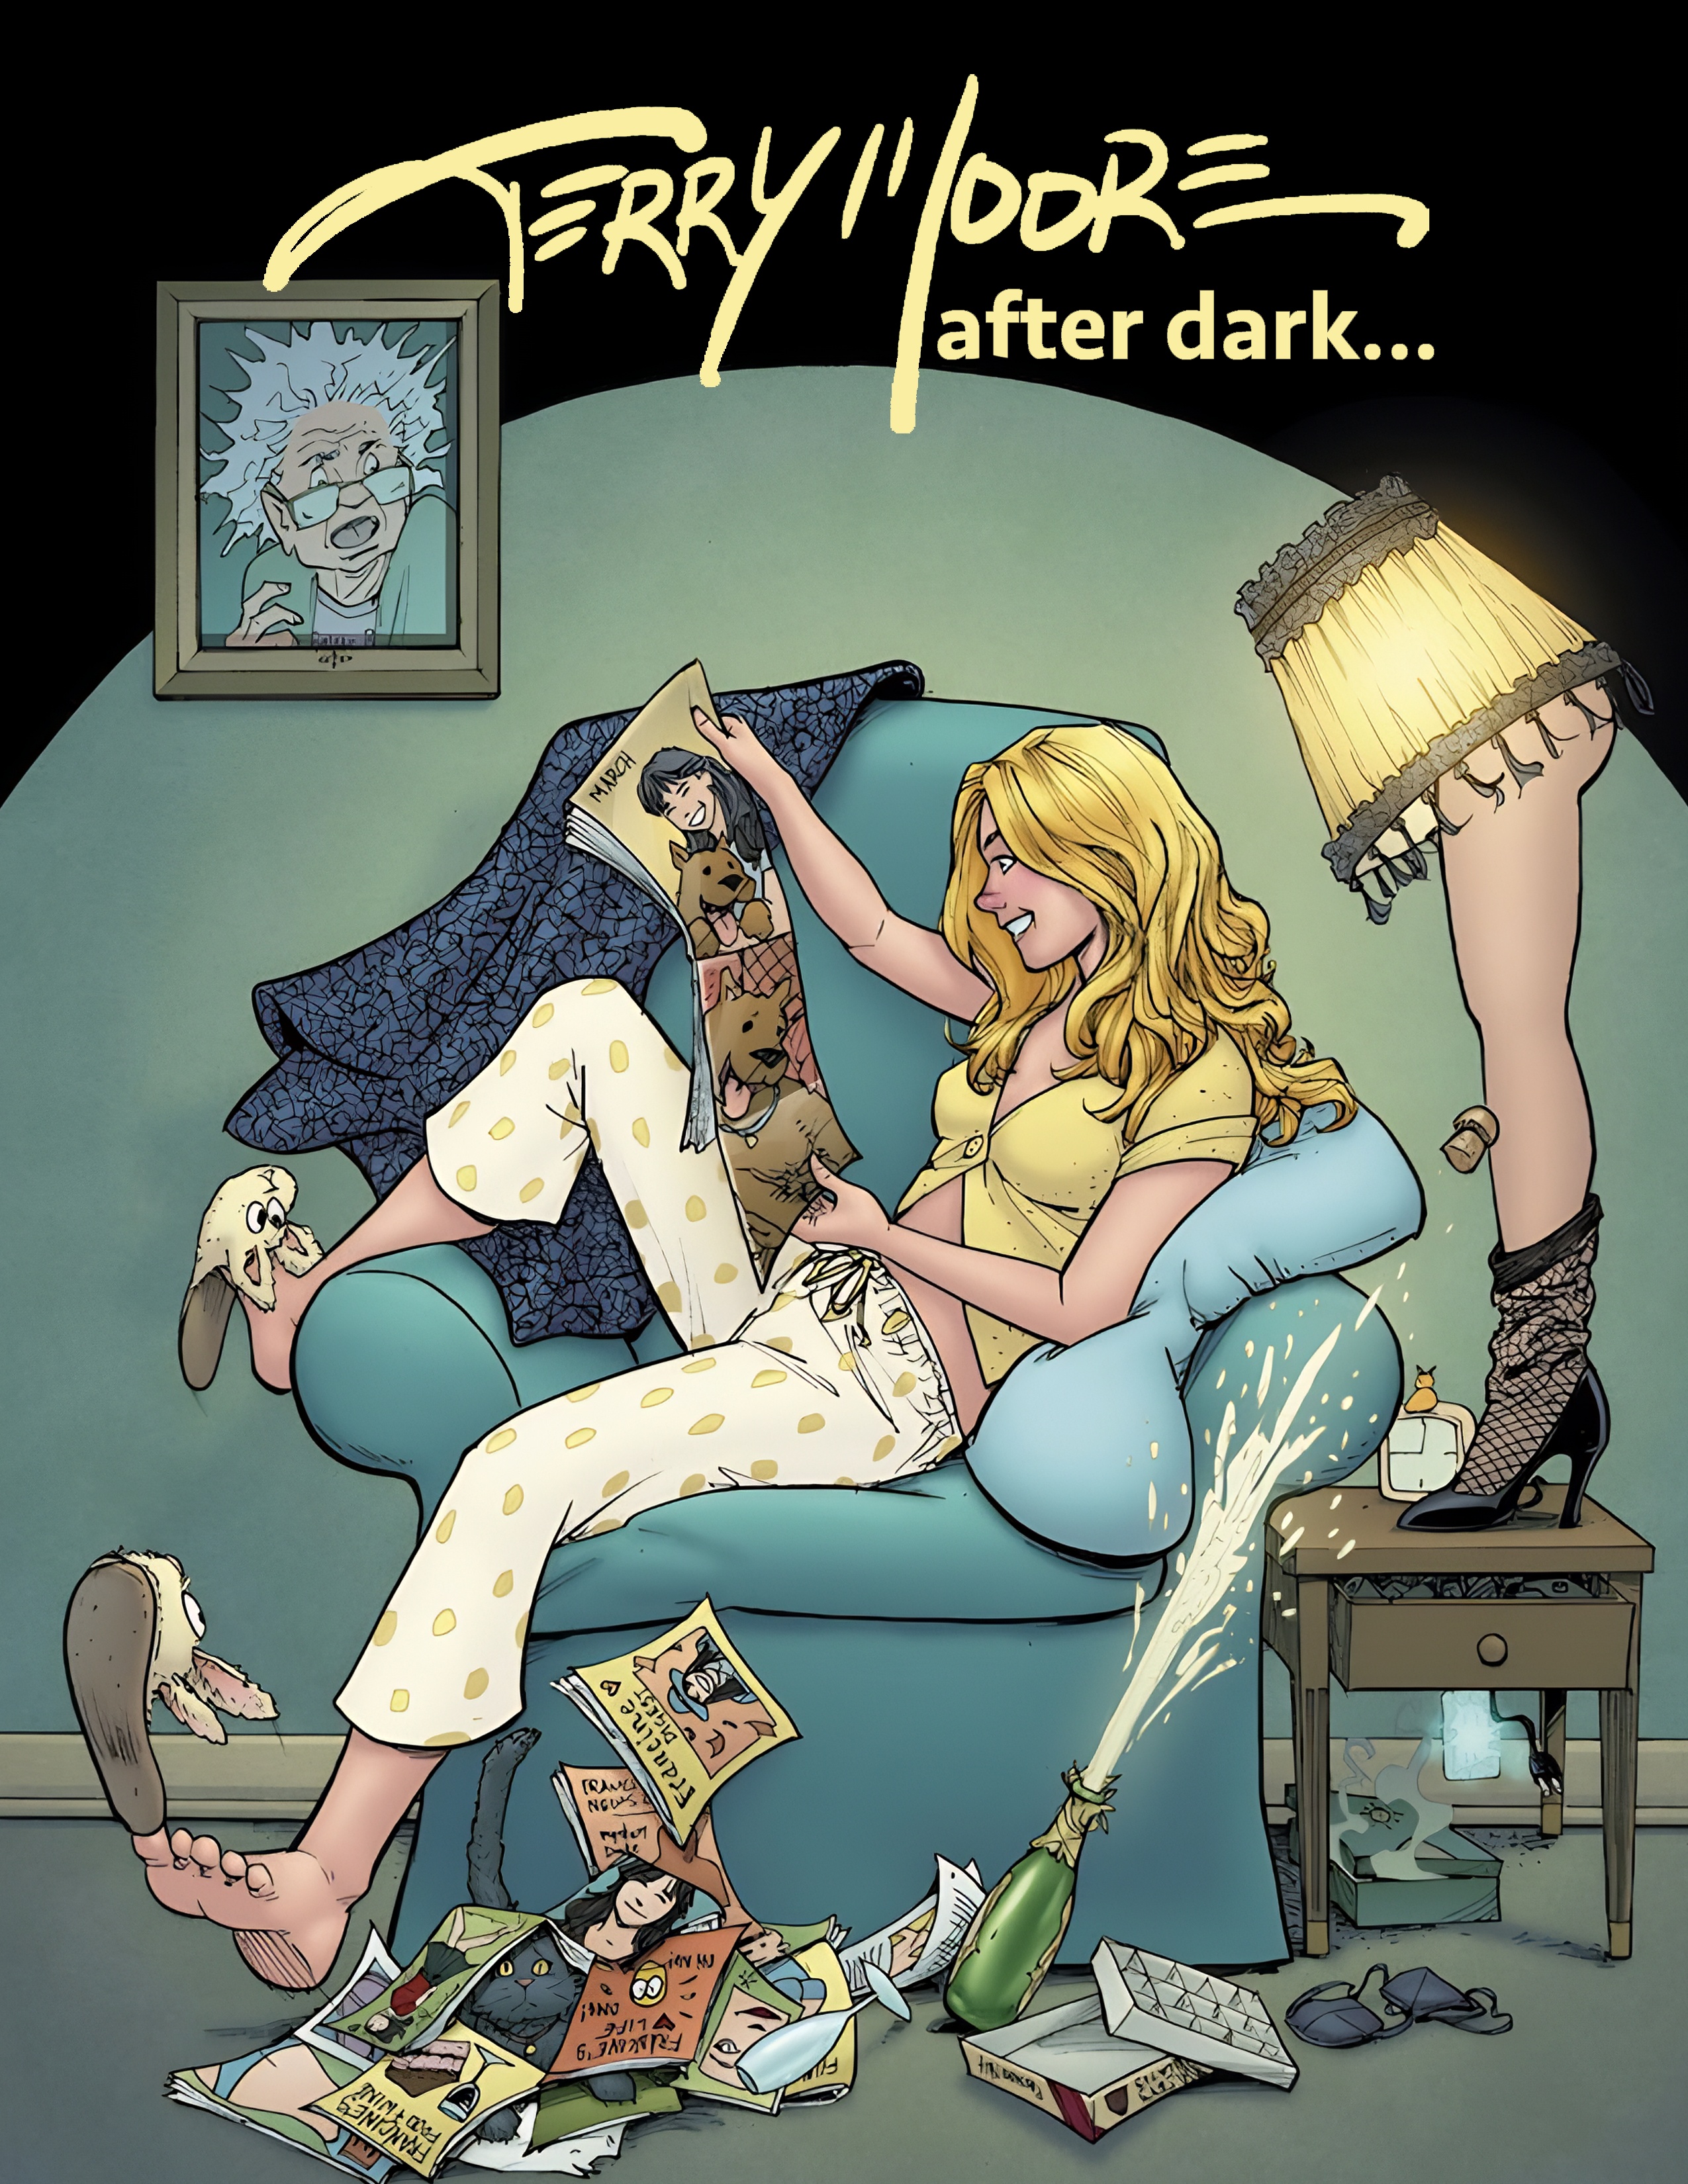 Read online Terry Moore after dark… comic -  Issue # TPB - 3